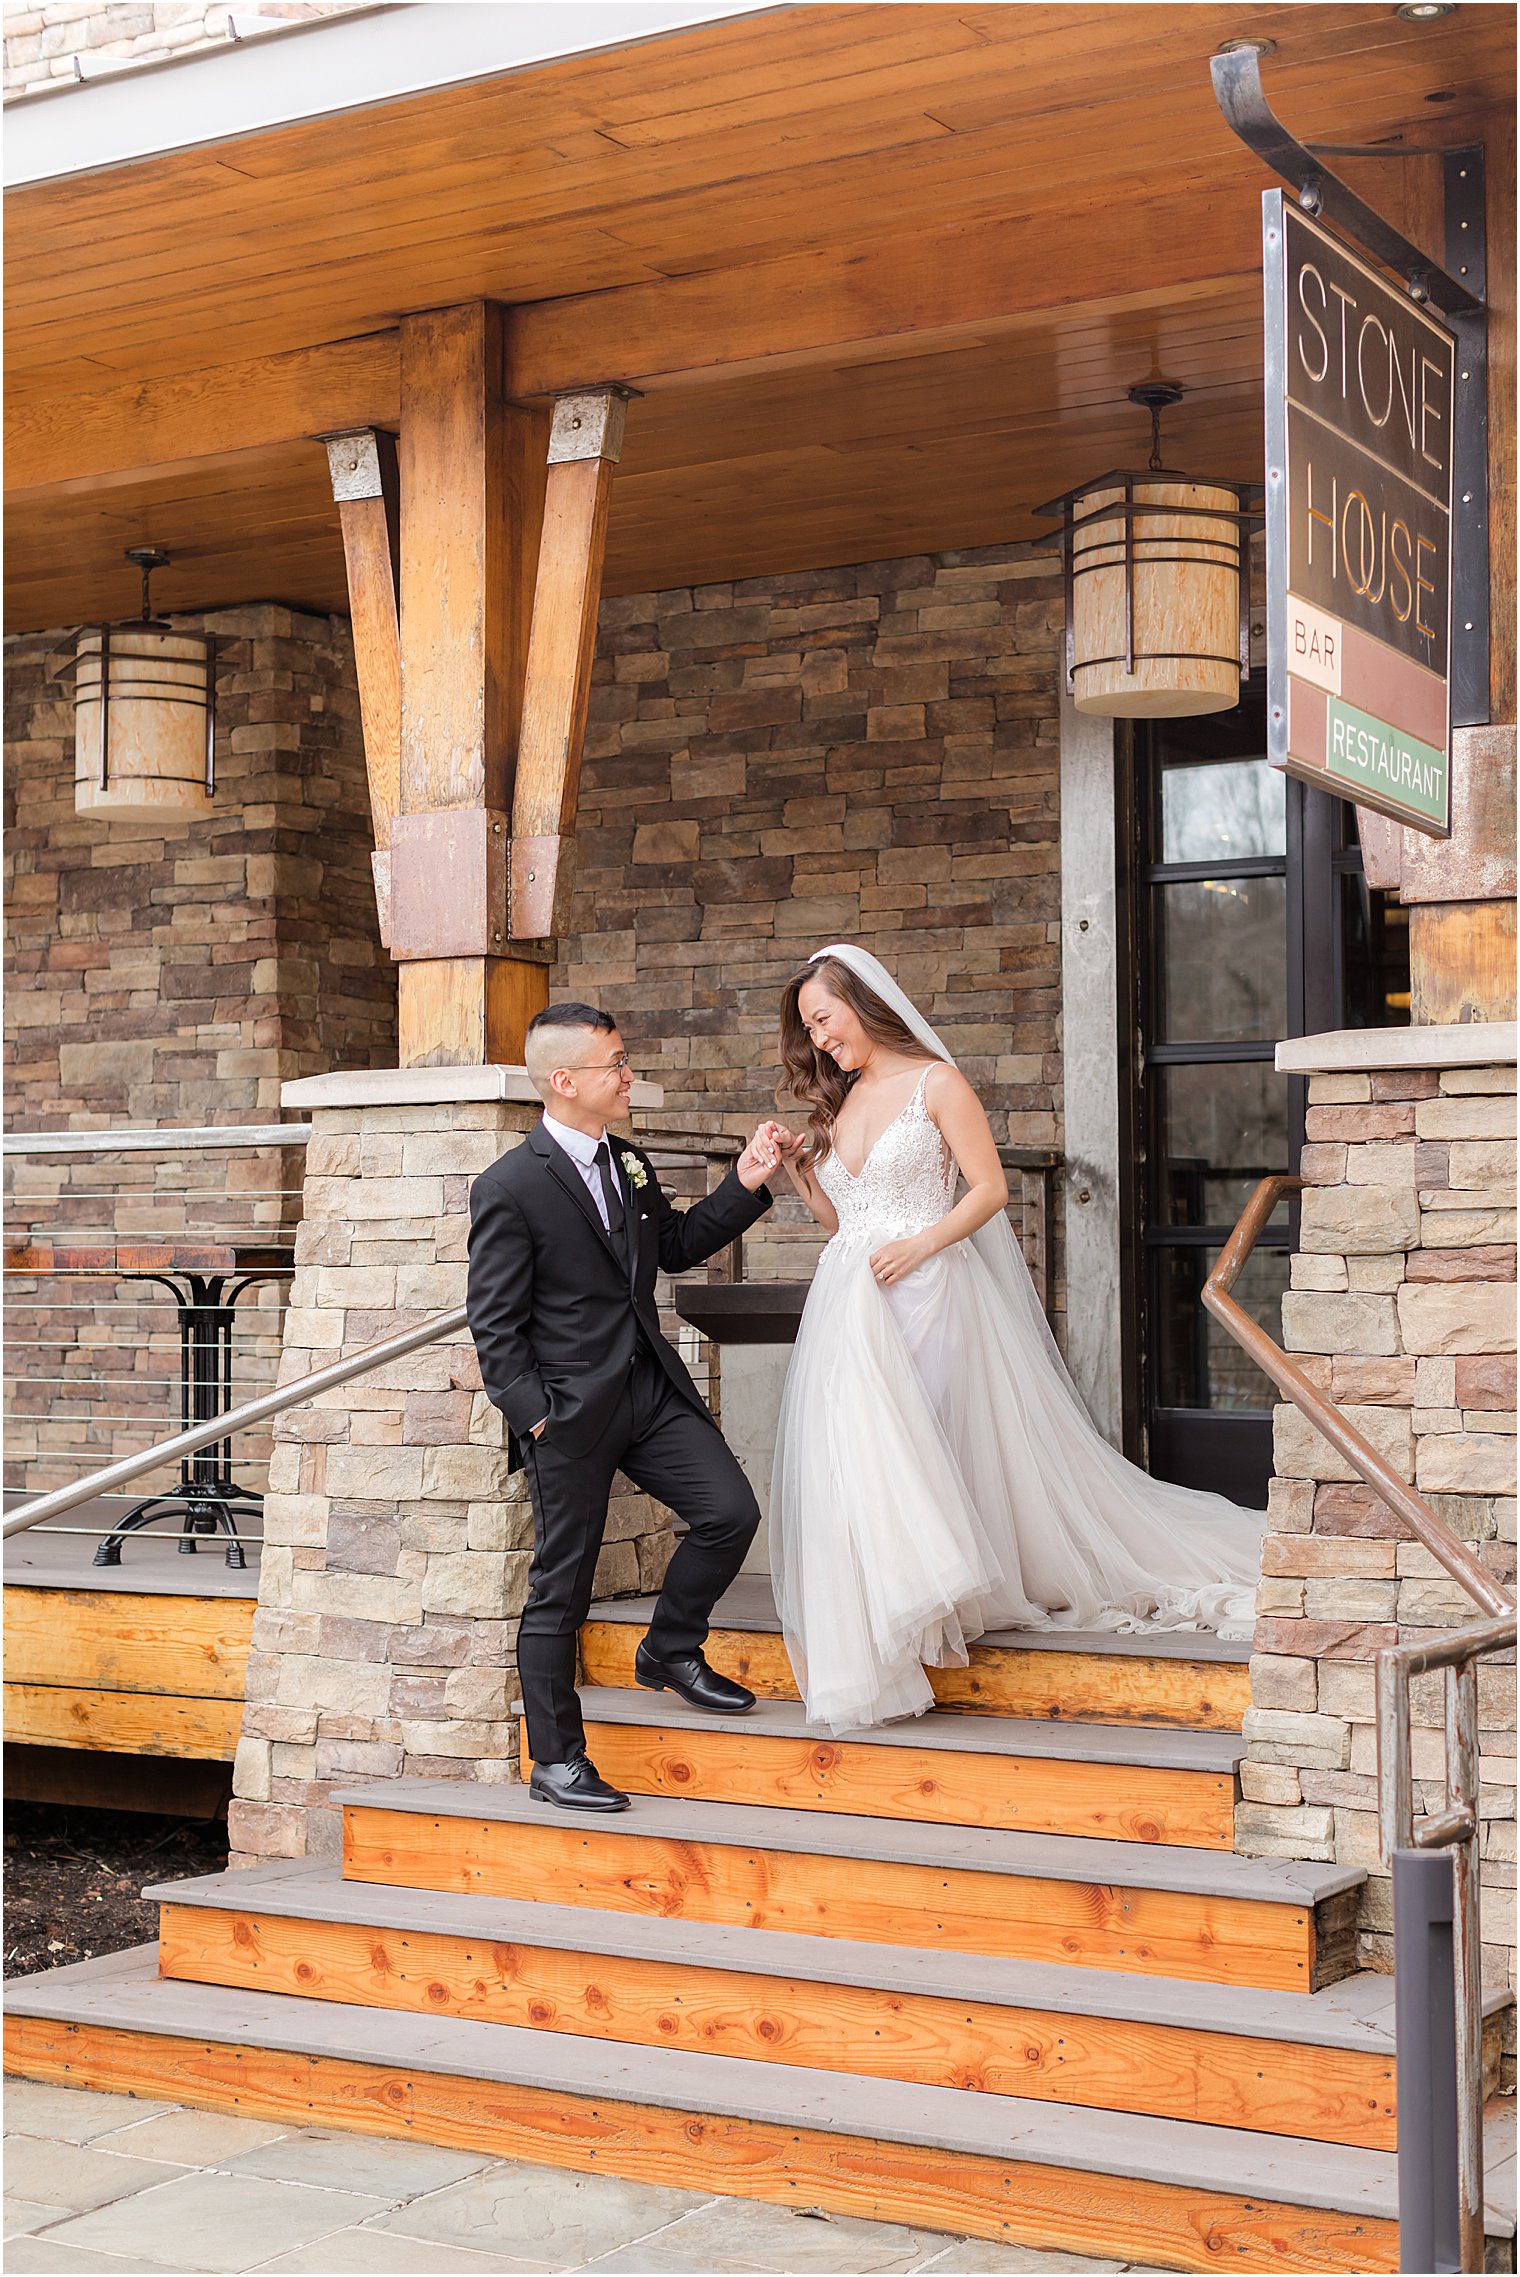 groom helps bride down steps at The Lodge at Stirling Ridge